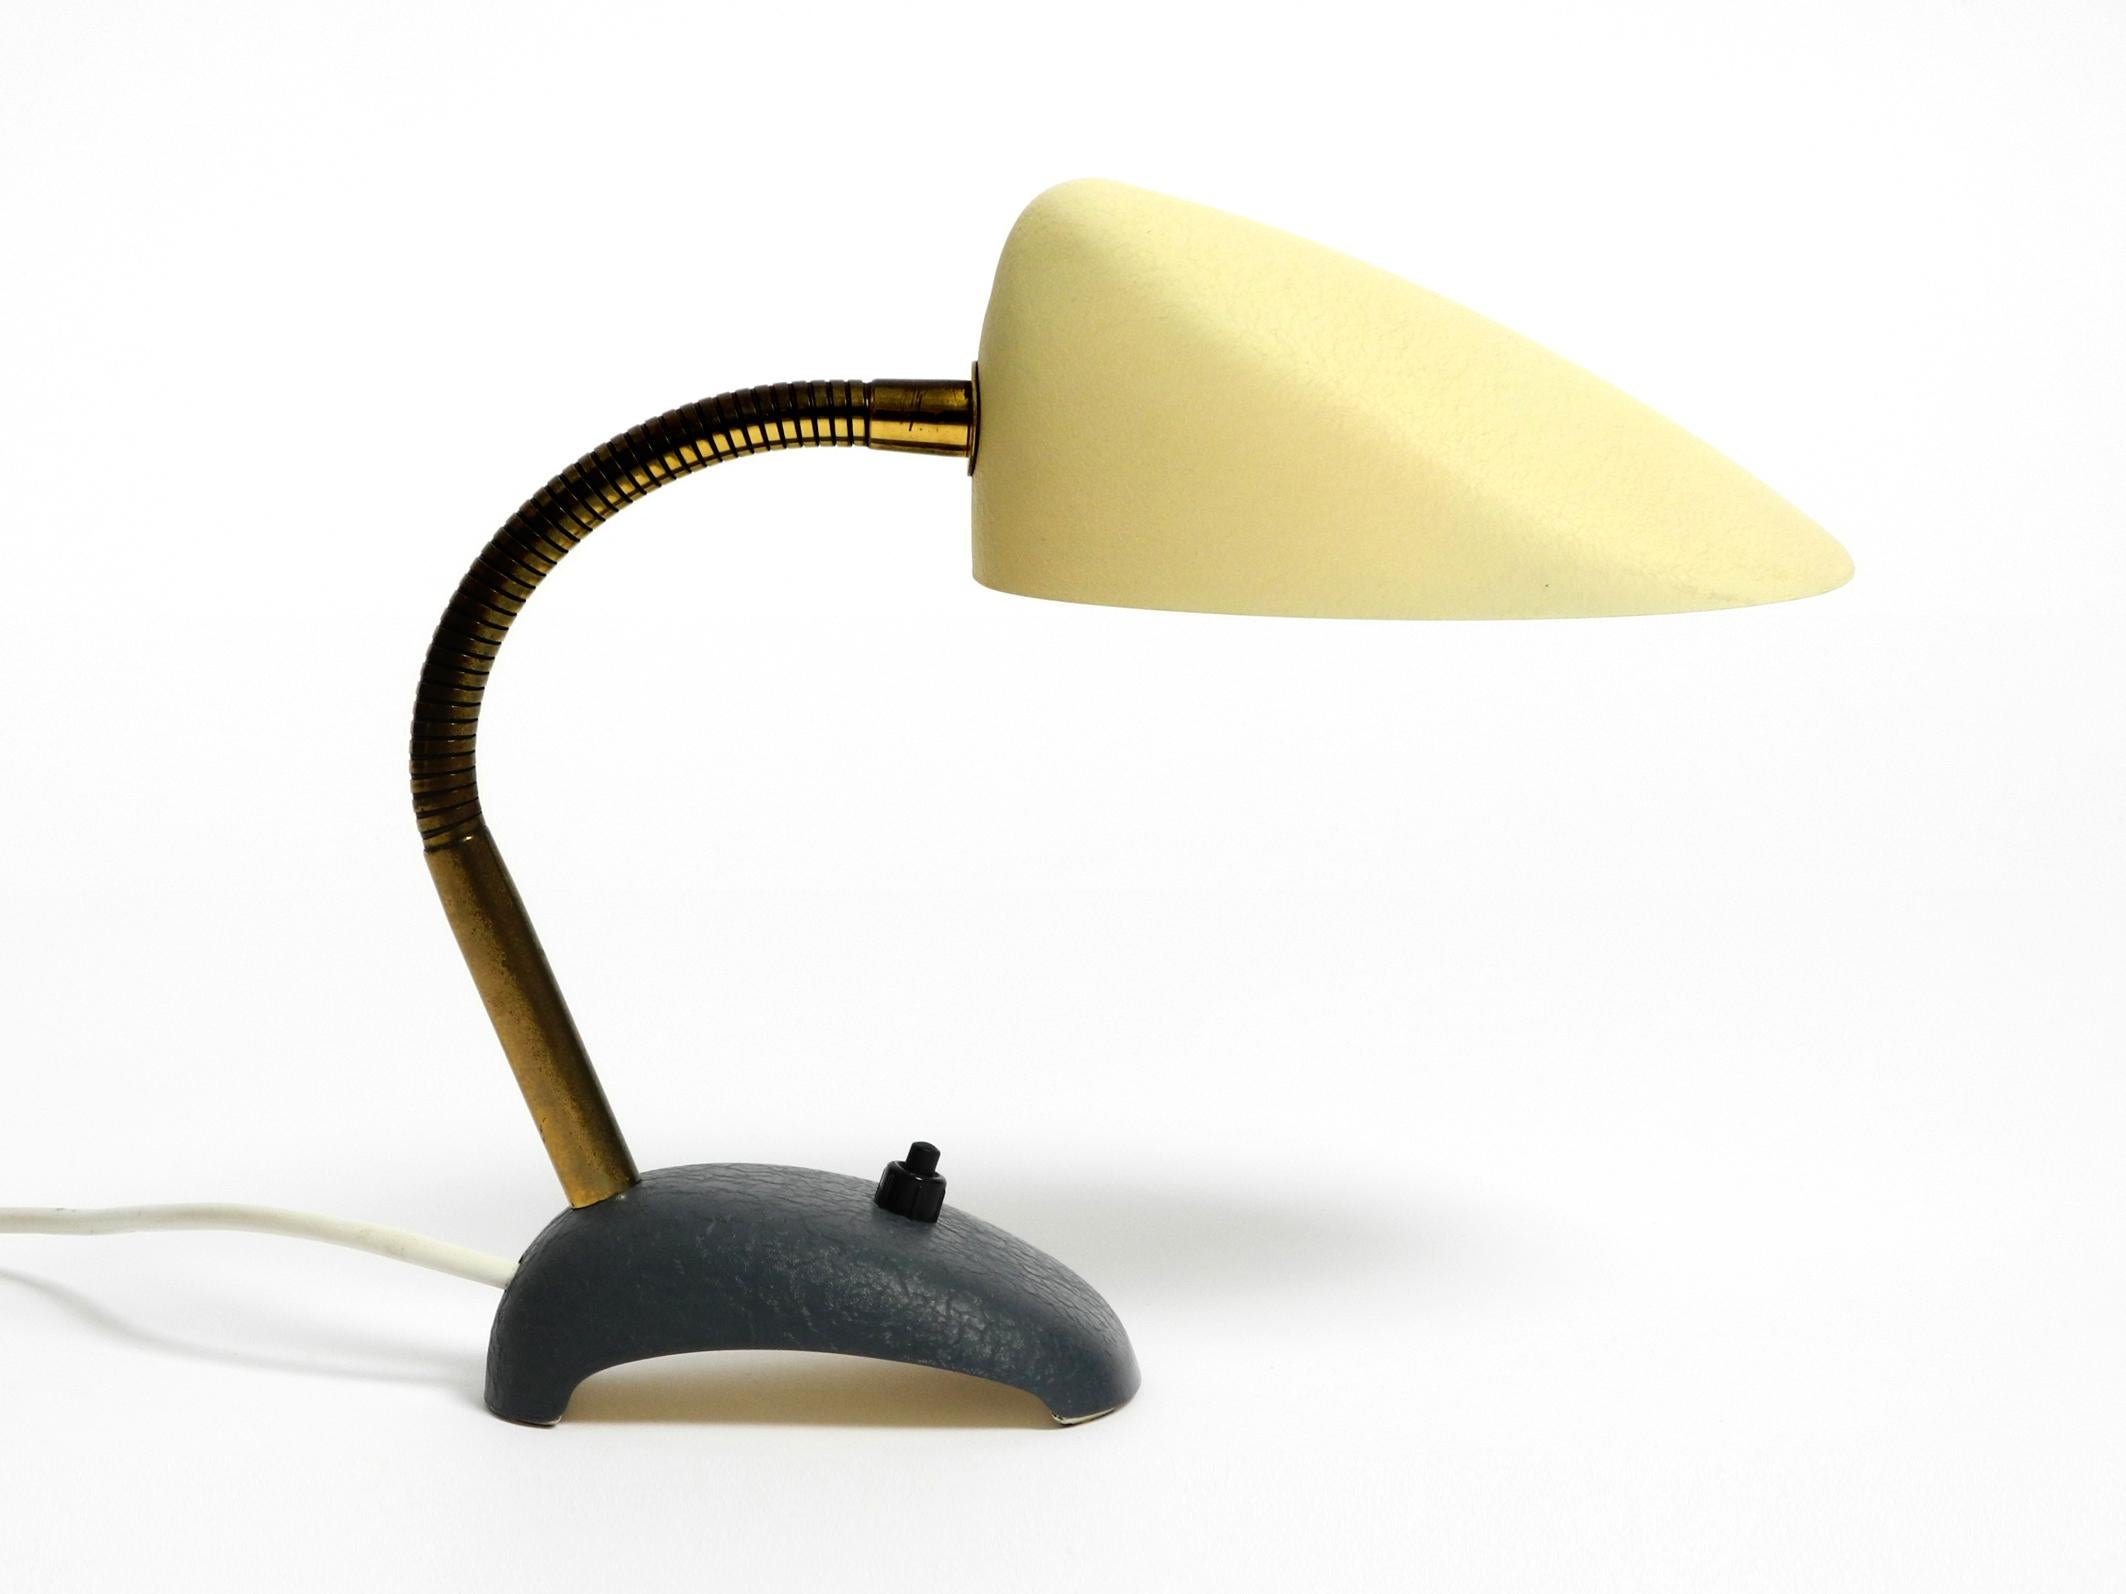 Beautiful small 1950s metal table lamp with brass gooseneck.
Manufacturer is Gebrüder Cosack. Made in Germany.
Mustard yellow shrink varnish on the shade and grey-blue base.
Shell-shaped lampshade, steplessly adjustable to all sides. Holds in any